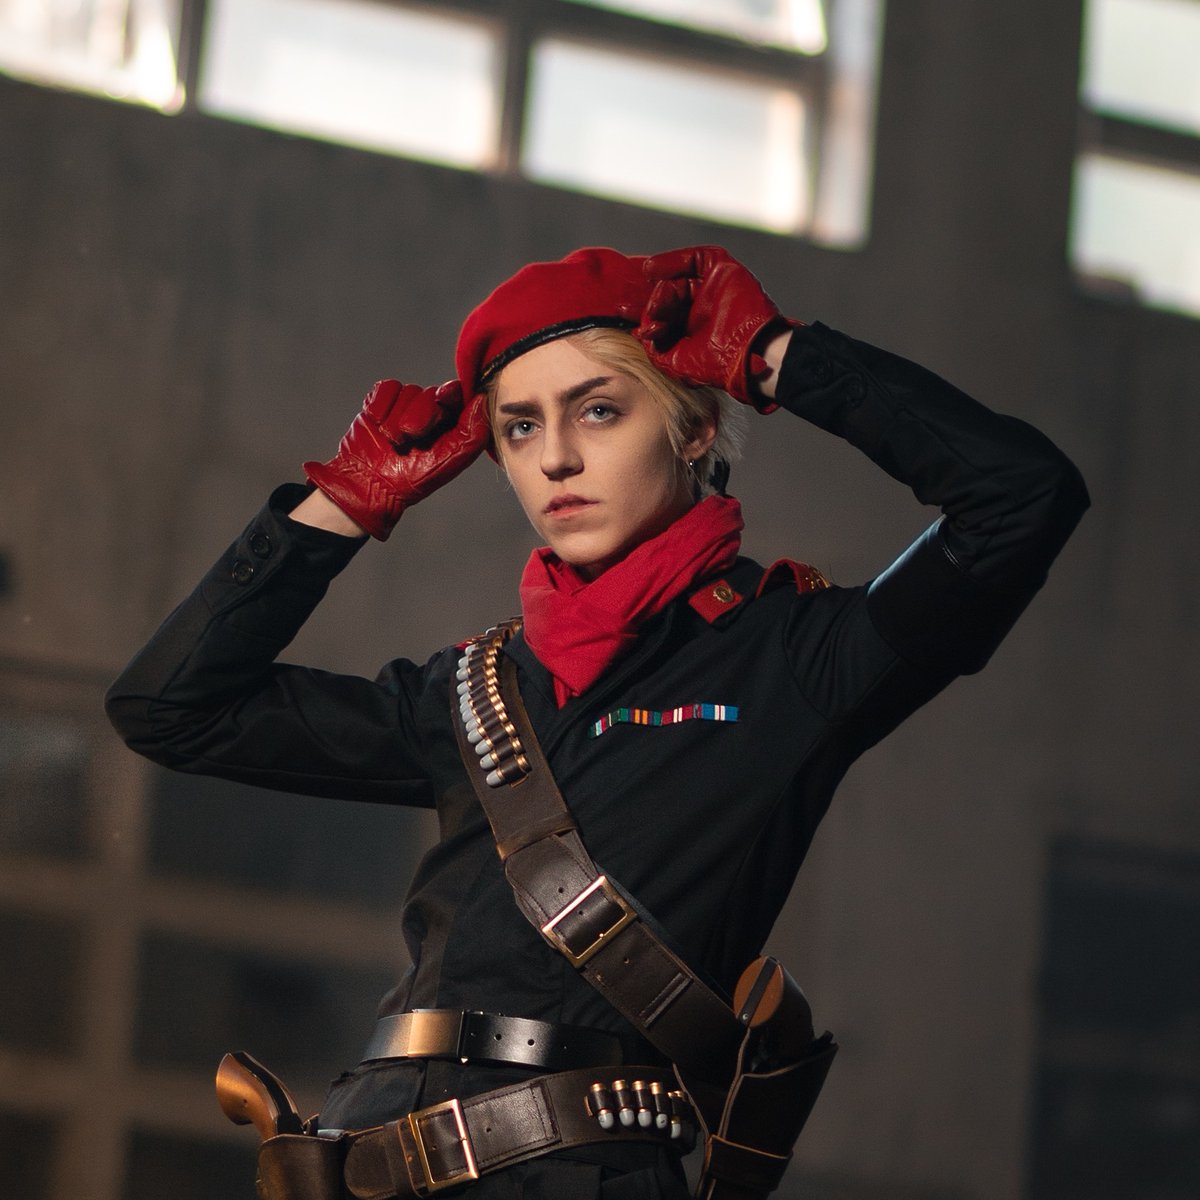 Happy 17th birthday #MetalGearSolid3! 
One of my absolute favourite games! ❤️

Ocelot uniform patterns: @MammmaGina 
Belts: @NuclearRaine 
📸: @BaroPhotography at @in_volta 
#ilvolta #volta #voltaincosplay #volta2021 #ilvolta2021

#mgs3 #revolverocelot #cosplay #snakeeater